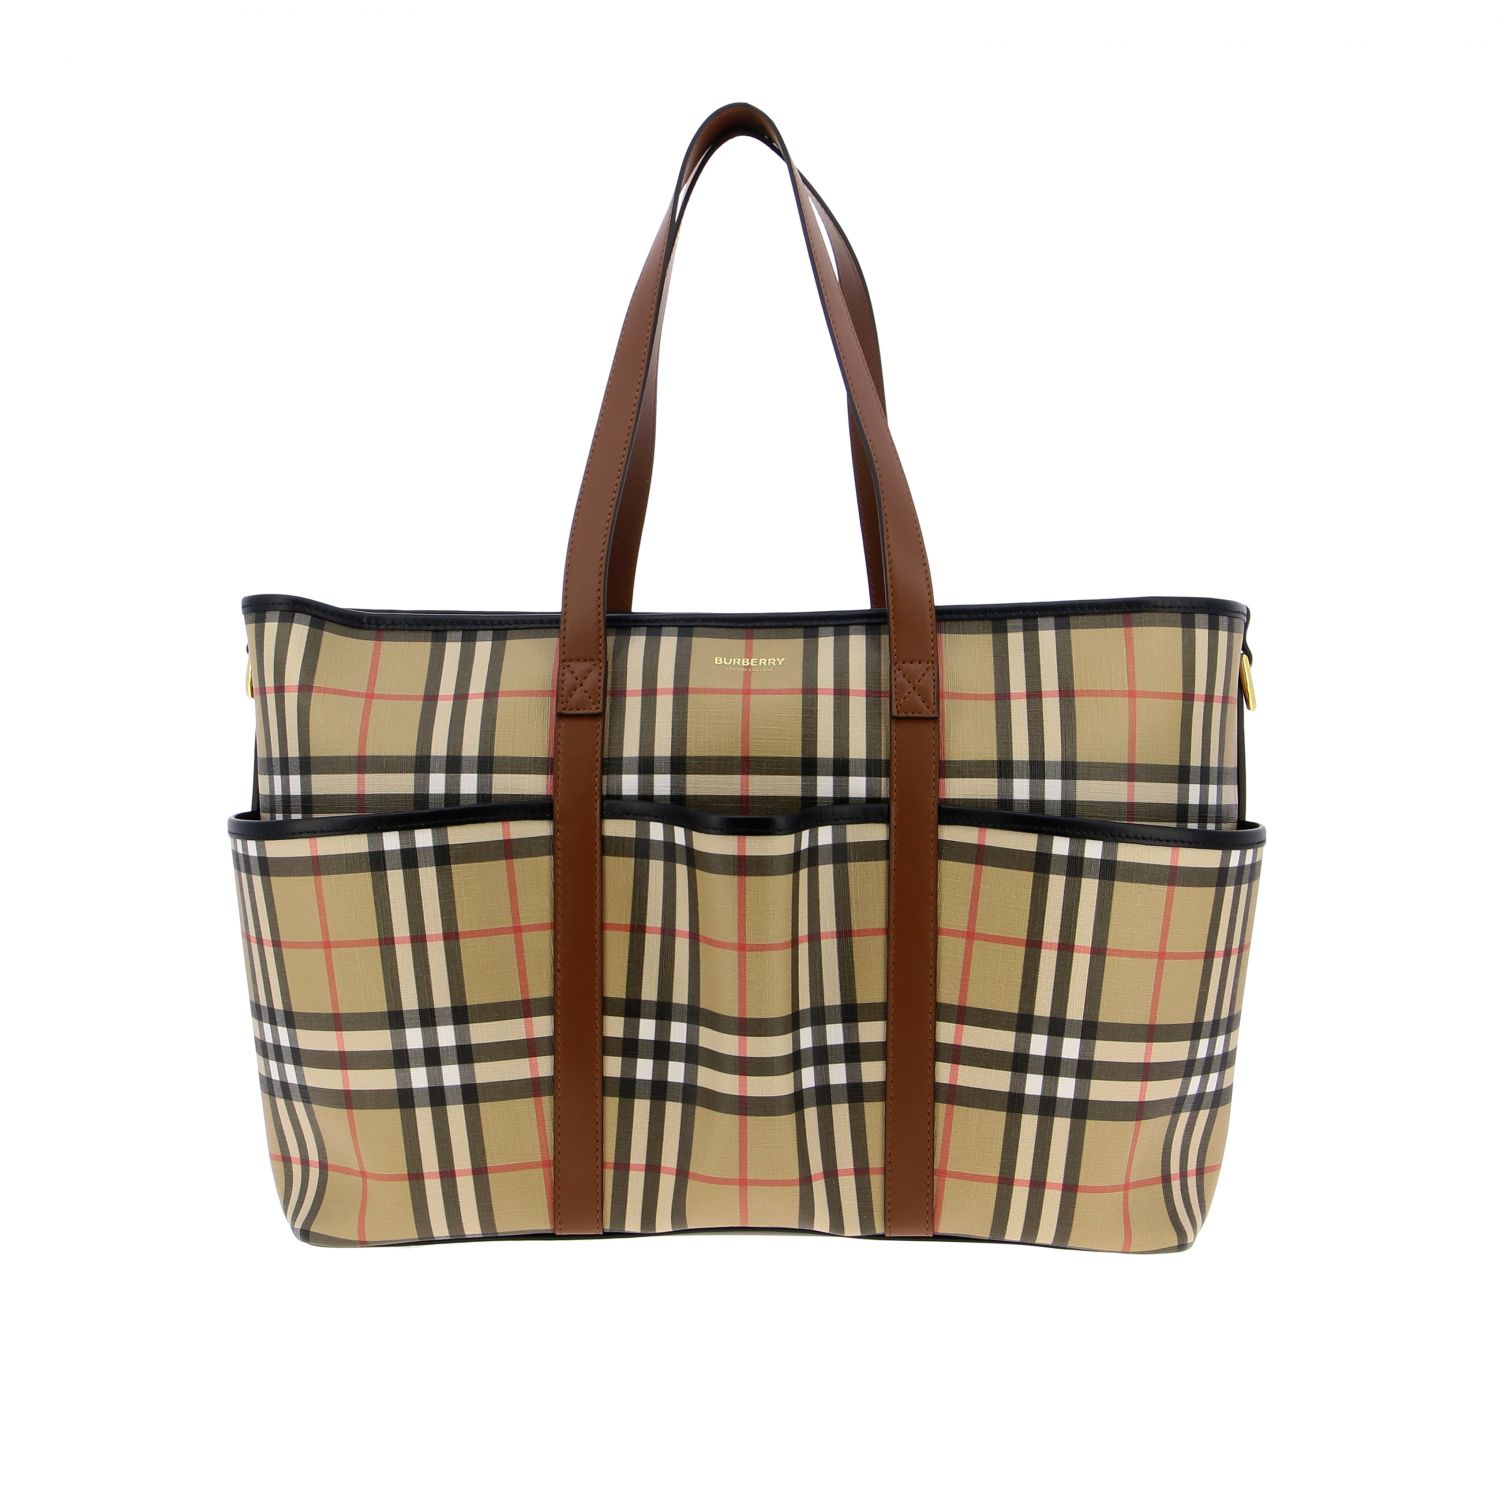 Burberry Outlet: Mama's bag in check leather with logo - Beige ...